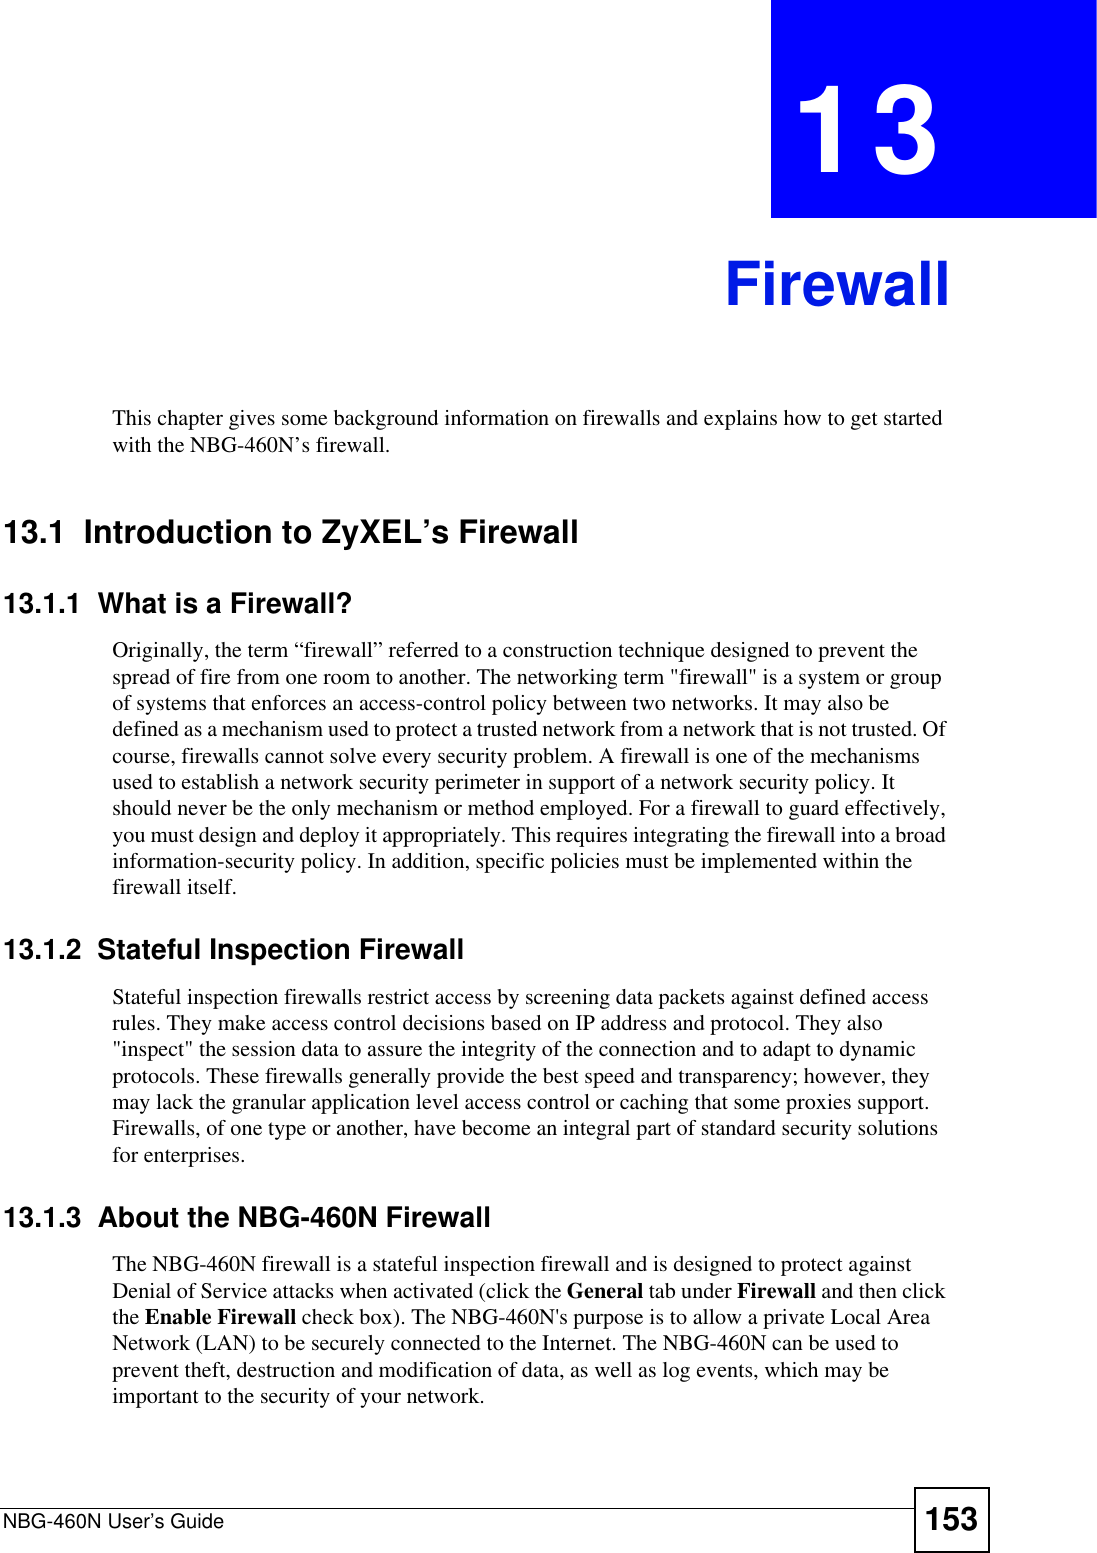 NBG-460N User’s Guide 153CHAPTER 13FirewallThis chapter gives some background information on firewalls and explains how to get started with the NBG-460N’s firewall.13.1  Introduction to ZyXEL’s Firewall13.1.1  What is a Firewall?Originally, the term “firewall” referred to a construction technique designed to prevent the spread of fire from one room to another. The networking term &quot;firewall&quot; is a system or group of systems that enforces an access-control policy between two networks. It may also be defined as a mechanism used to protect a trusted network from a network that is not trusted. Of course, firewalls cannot solve every security problem. A firewall is one of the mechanisms used to establish a network security perimeter in support of a network security policy. It should never be the only mechanism or method employed. For a firewall to guard effectively, you must design and deploy it appropriately. This requires integrating the firewall into a broad information-security policy. In addition, specific policies must be implemented within the firewall itself. 13.1.2  Stateful Inspection Firewall Stateful inspection firewalls restrict access by screening data packets against defined access rules. They make access control decisions based on IP address and protocol. They also &quot;inspect&quot; the session data to assure the integrity of the connection and to adapt to dynamic protocols. These firewalls generally provide the best speed and transparency; however, they may lack the granular application level access control or caching that some proxies support. Firewalls, of one type or another, have become an integral part of standard security solutions for enterprises.13.1.3  About the NBG-460N FirewallThe NBG-460N firewall is a stateful inspection firewall and is designed to protect against Denial of Service attacks when activated (click the General tab under Firewall and then click the Enable Firewall check box). The NBG-460N&apos;s purpose is to allow a private Local Area Network (LAN) to be securely connected to the Internet. The NBG-460N can be used to prevent theft, destruction and modification of data, as well as log events, which may be important to the security of your network. 